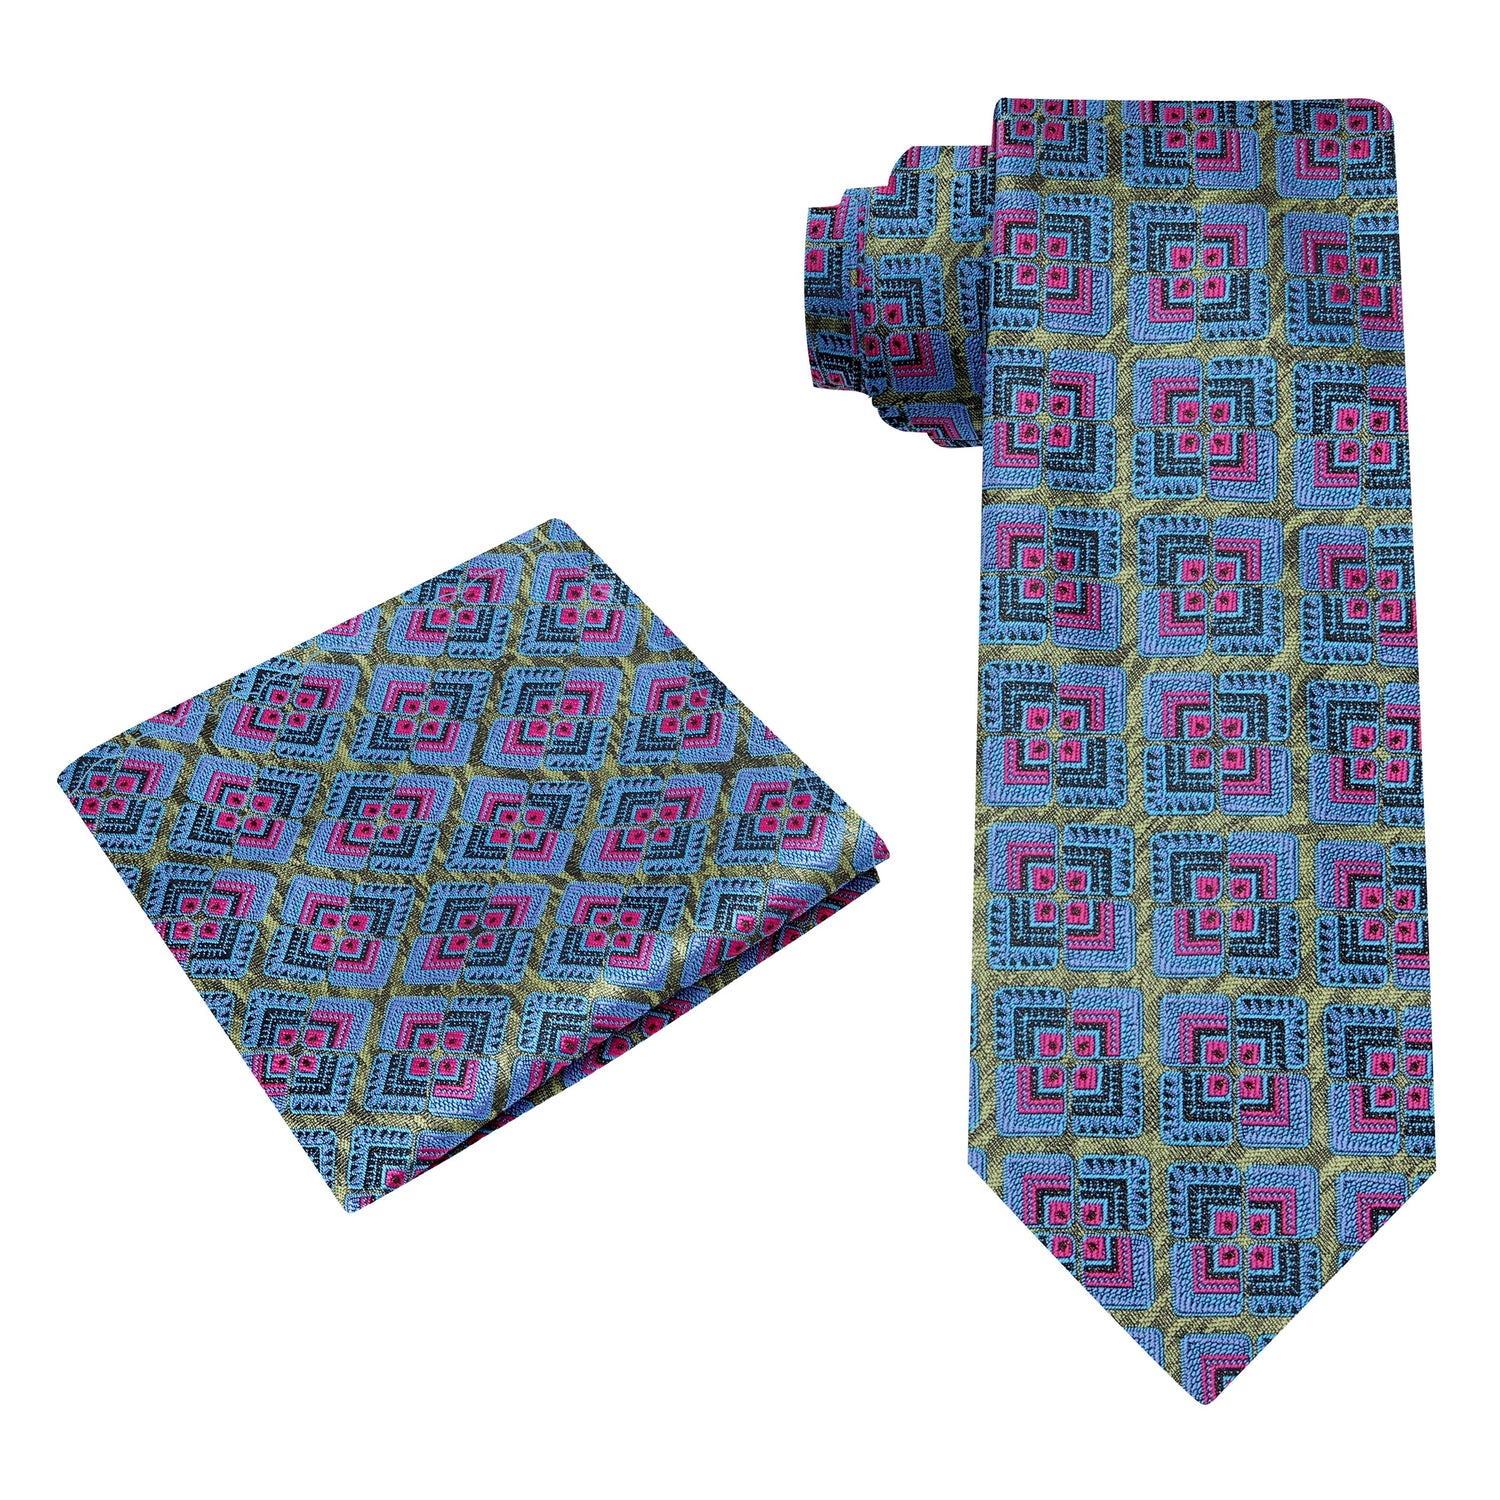 Alt View: RGreen, Blue, Pink Geometric Abstract Tie and Pocket Square